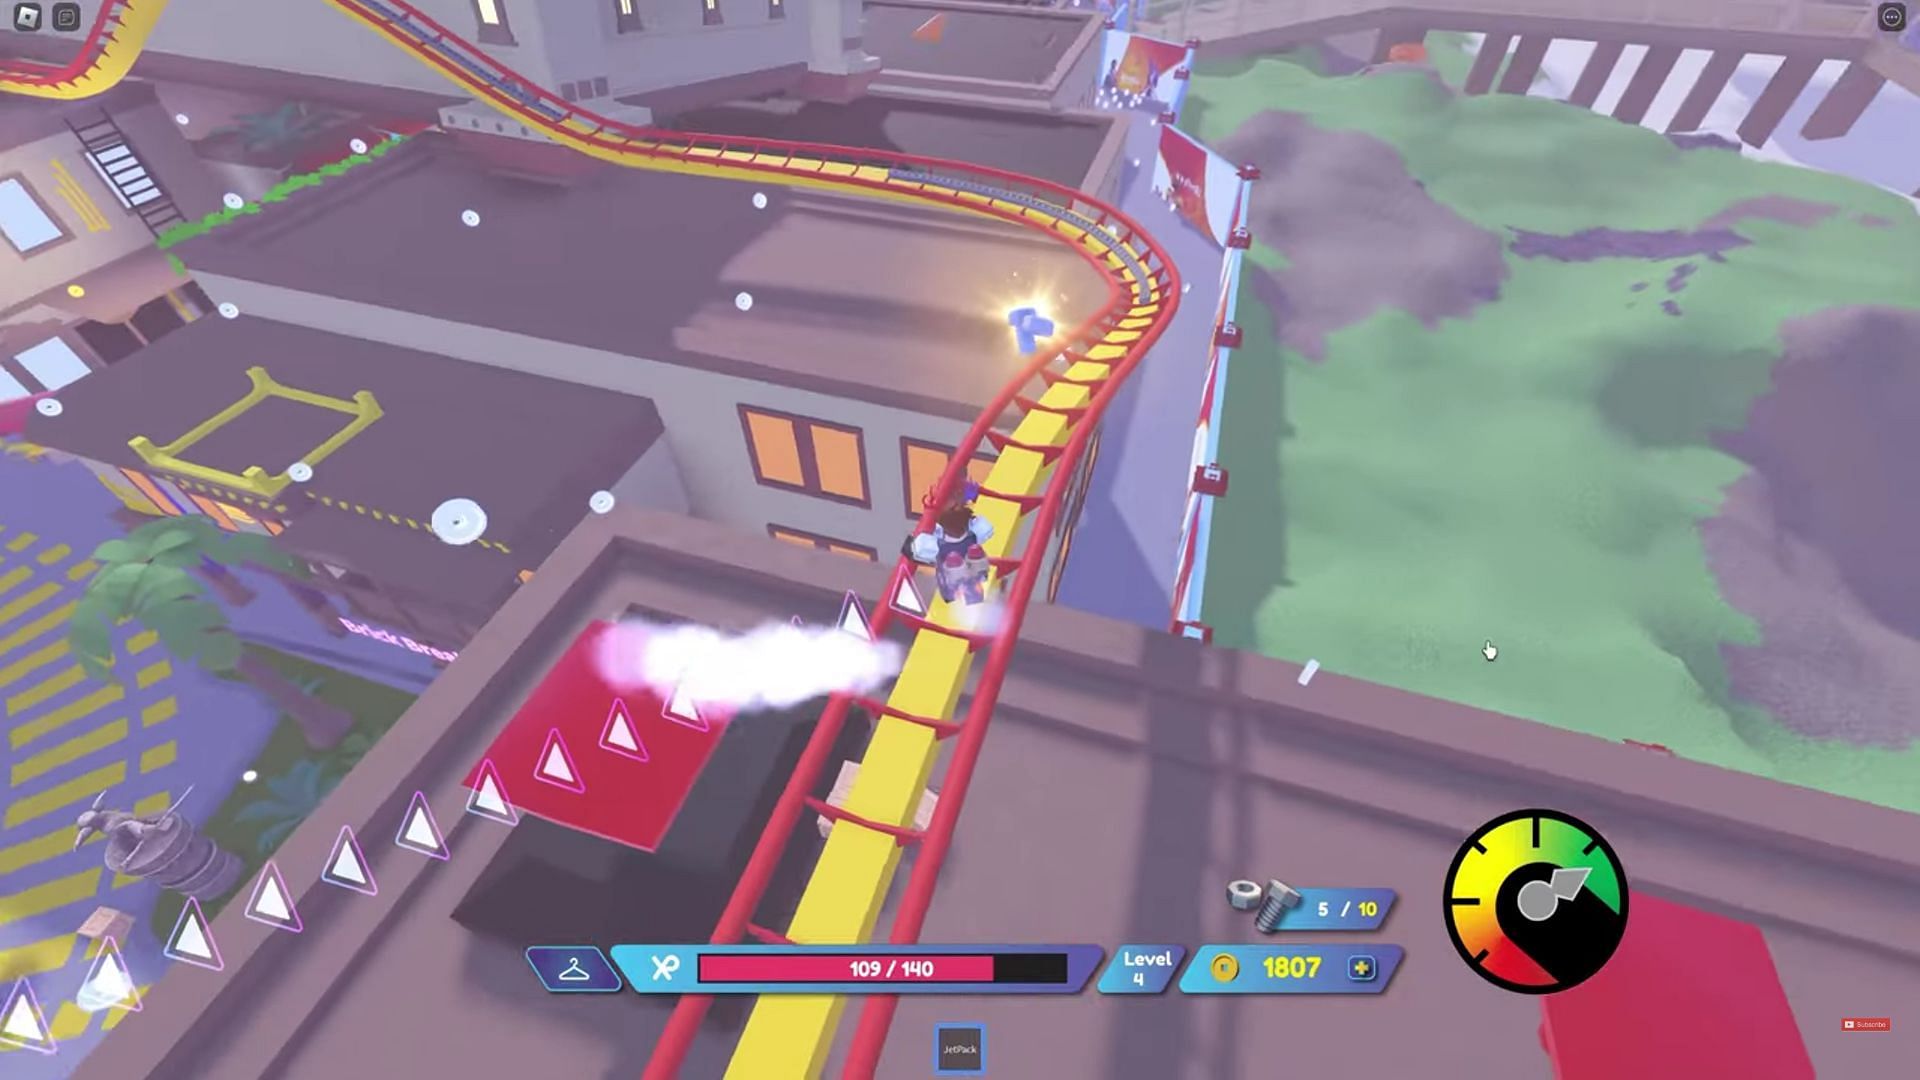 Sixth bolt on the track (Image via Conor3D/YouTube)